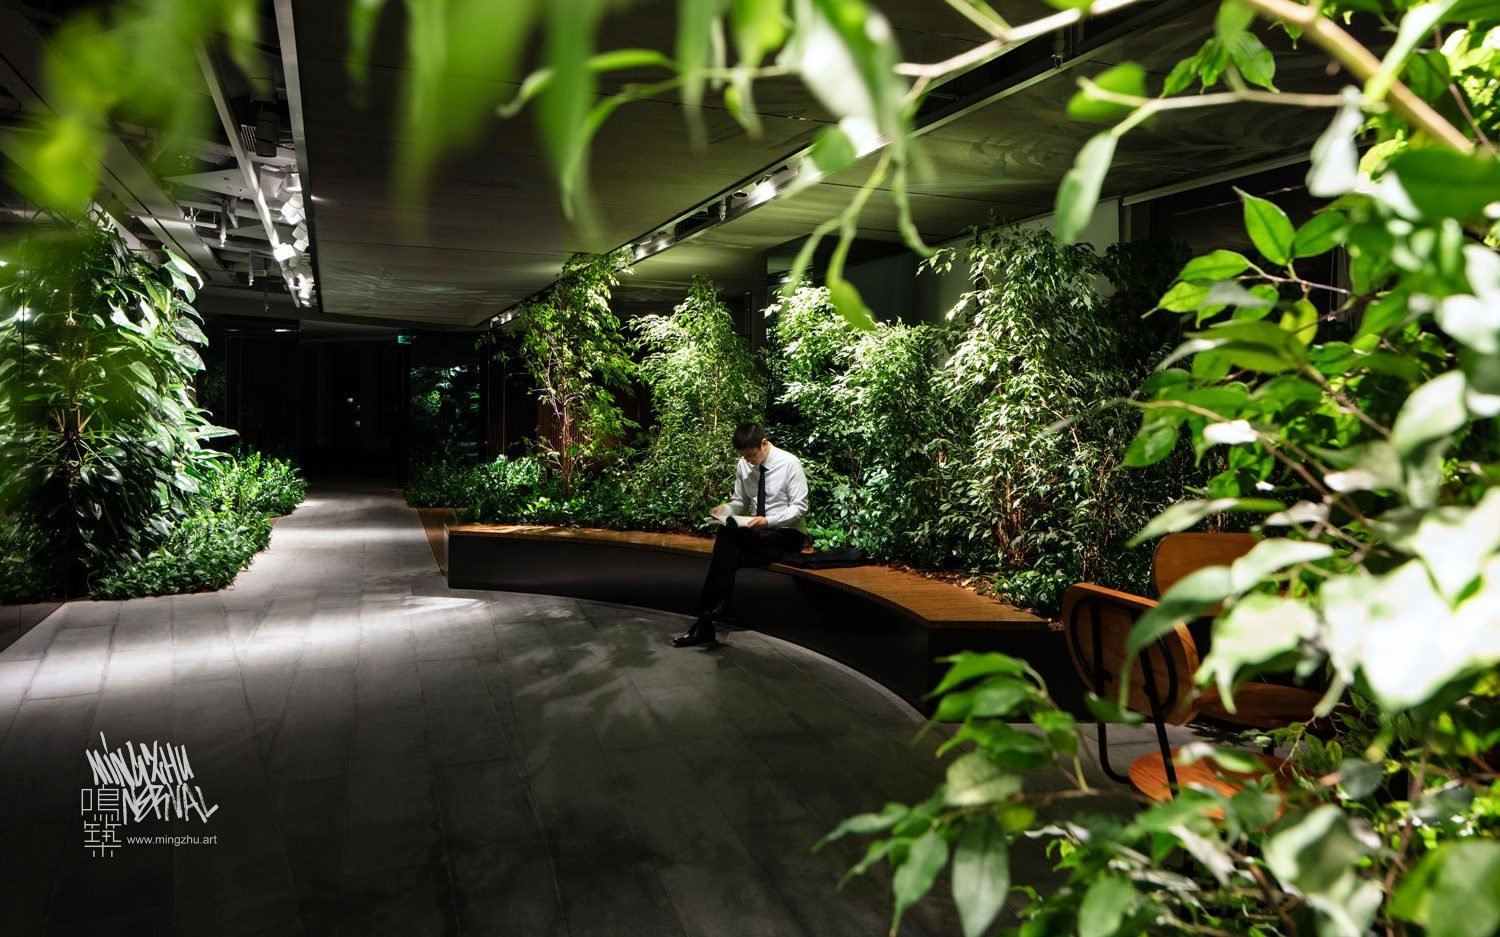 Mingzhu Nerval vertical living wall experts created the best garden design art for the Hines offices in Shanghai, 2016